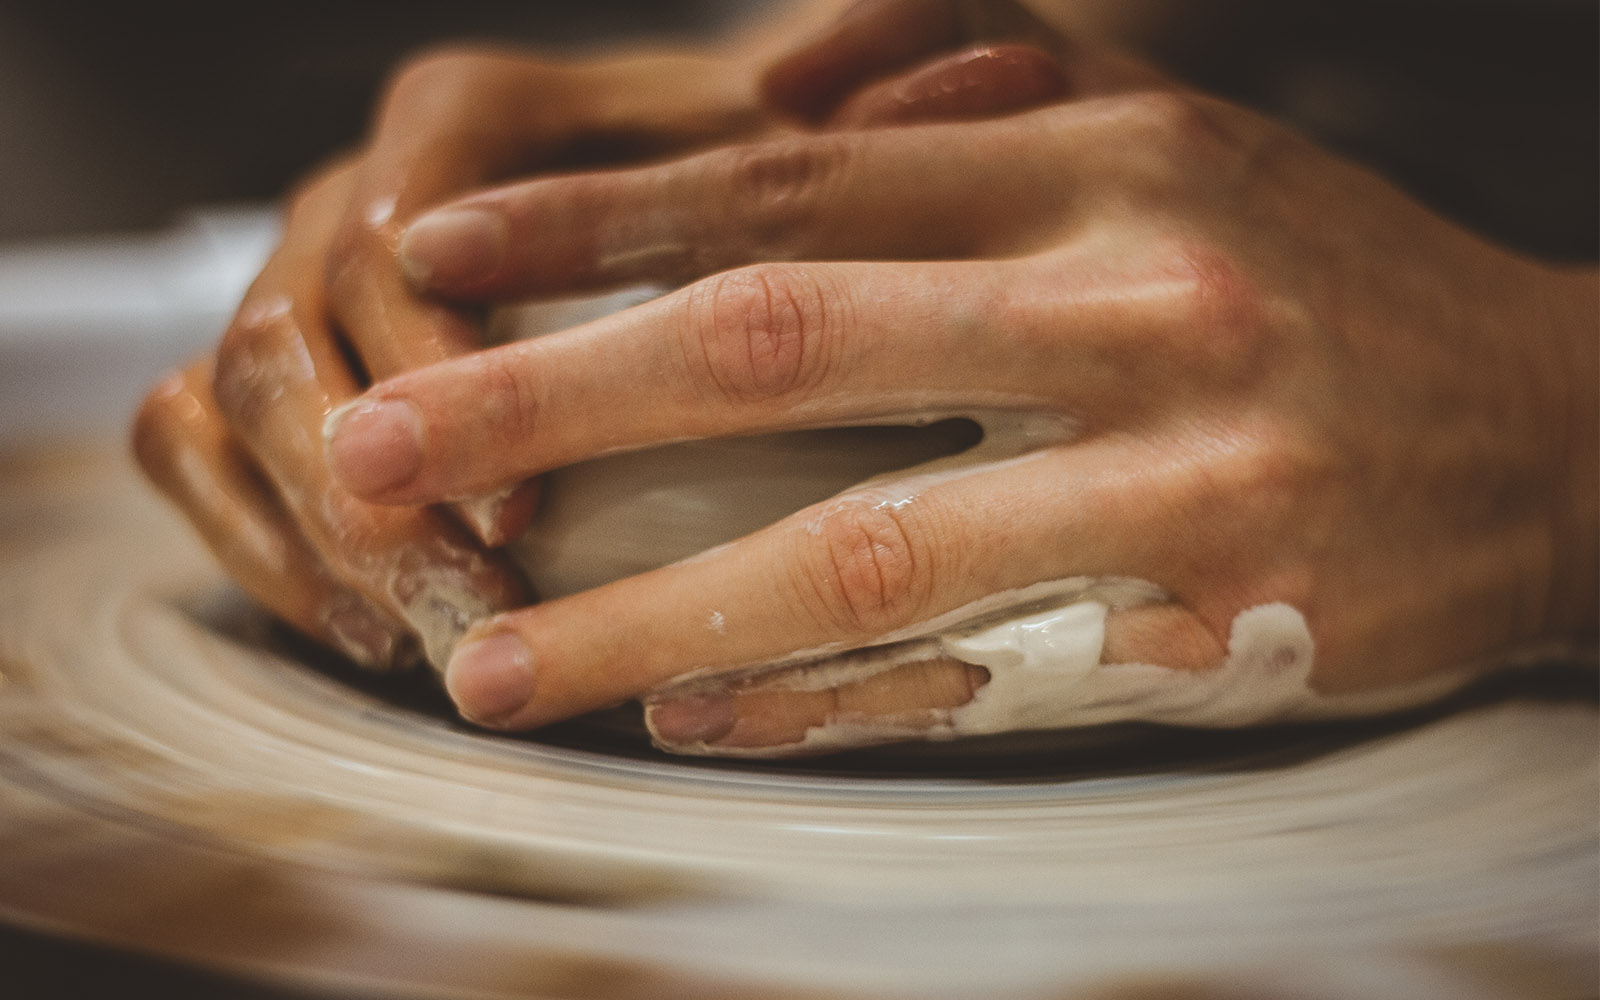 Potters hands lightly shaping a bowl out of clay